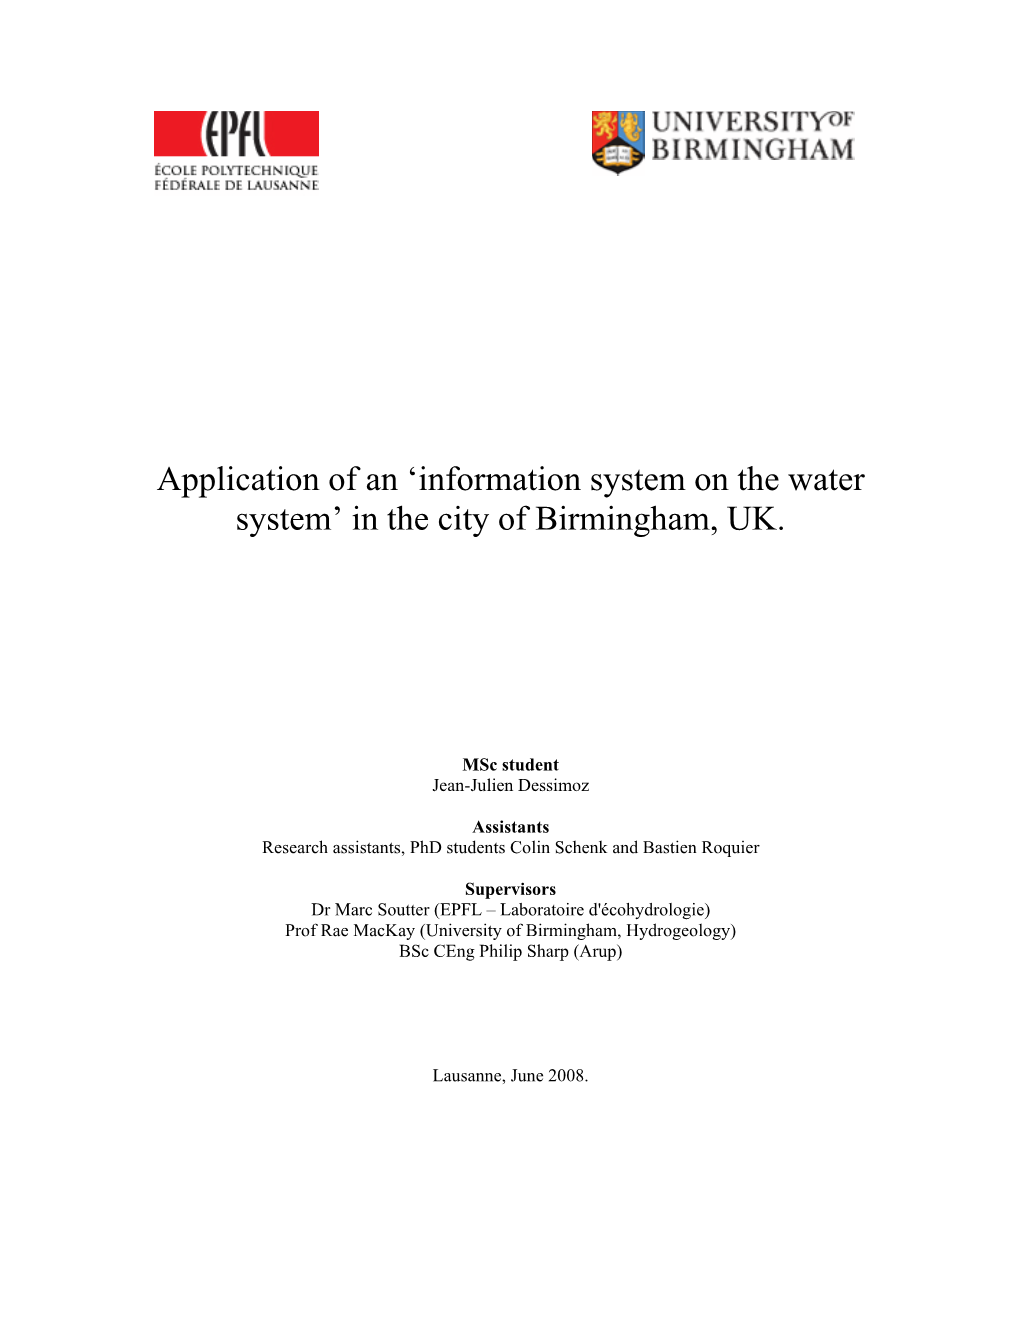 Application of an 'Information System on the Water System' in the City of Birmingham